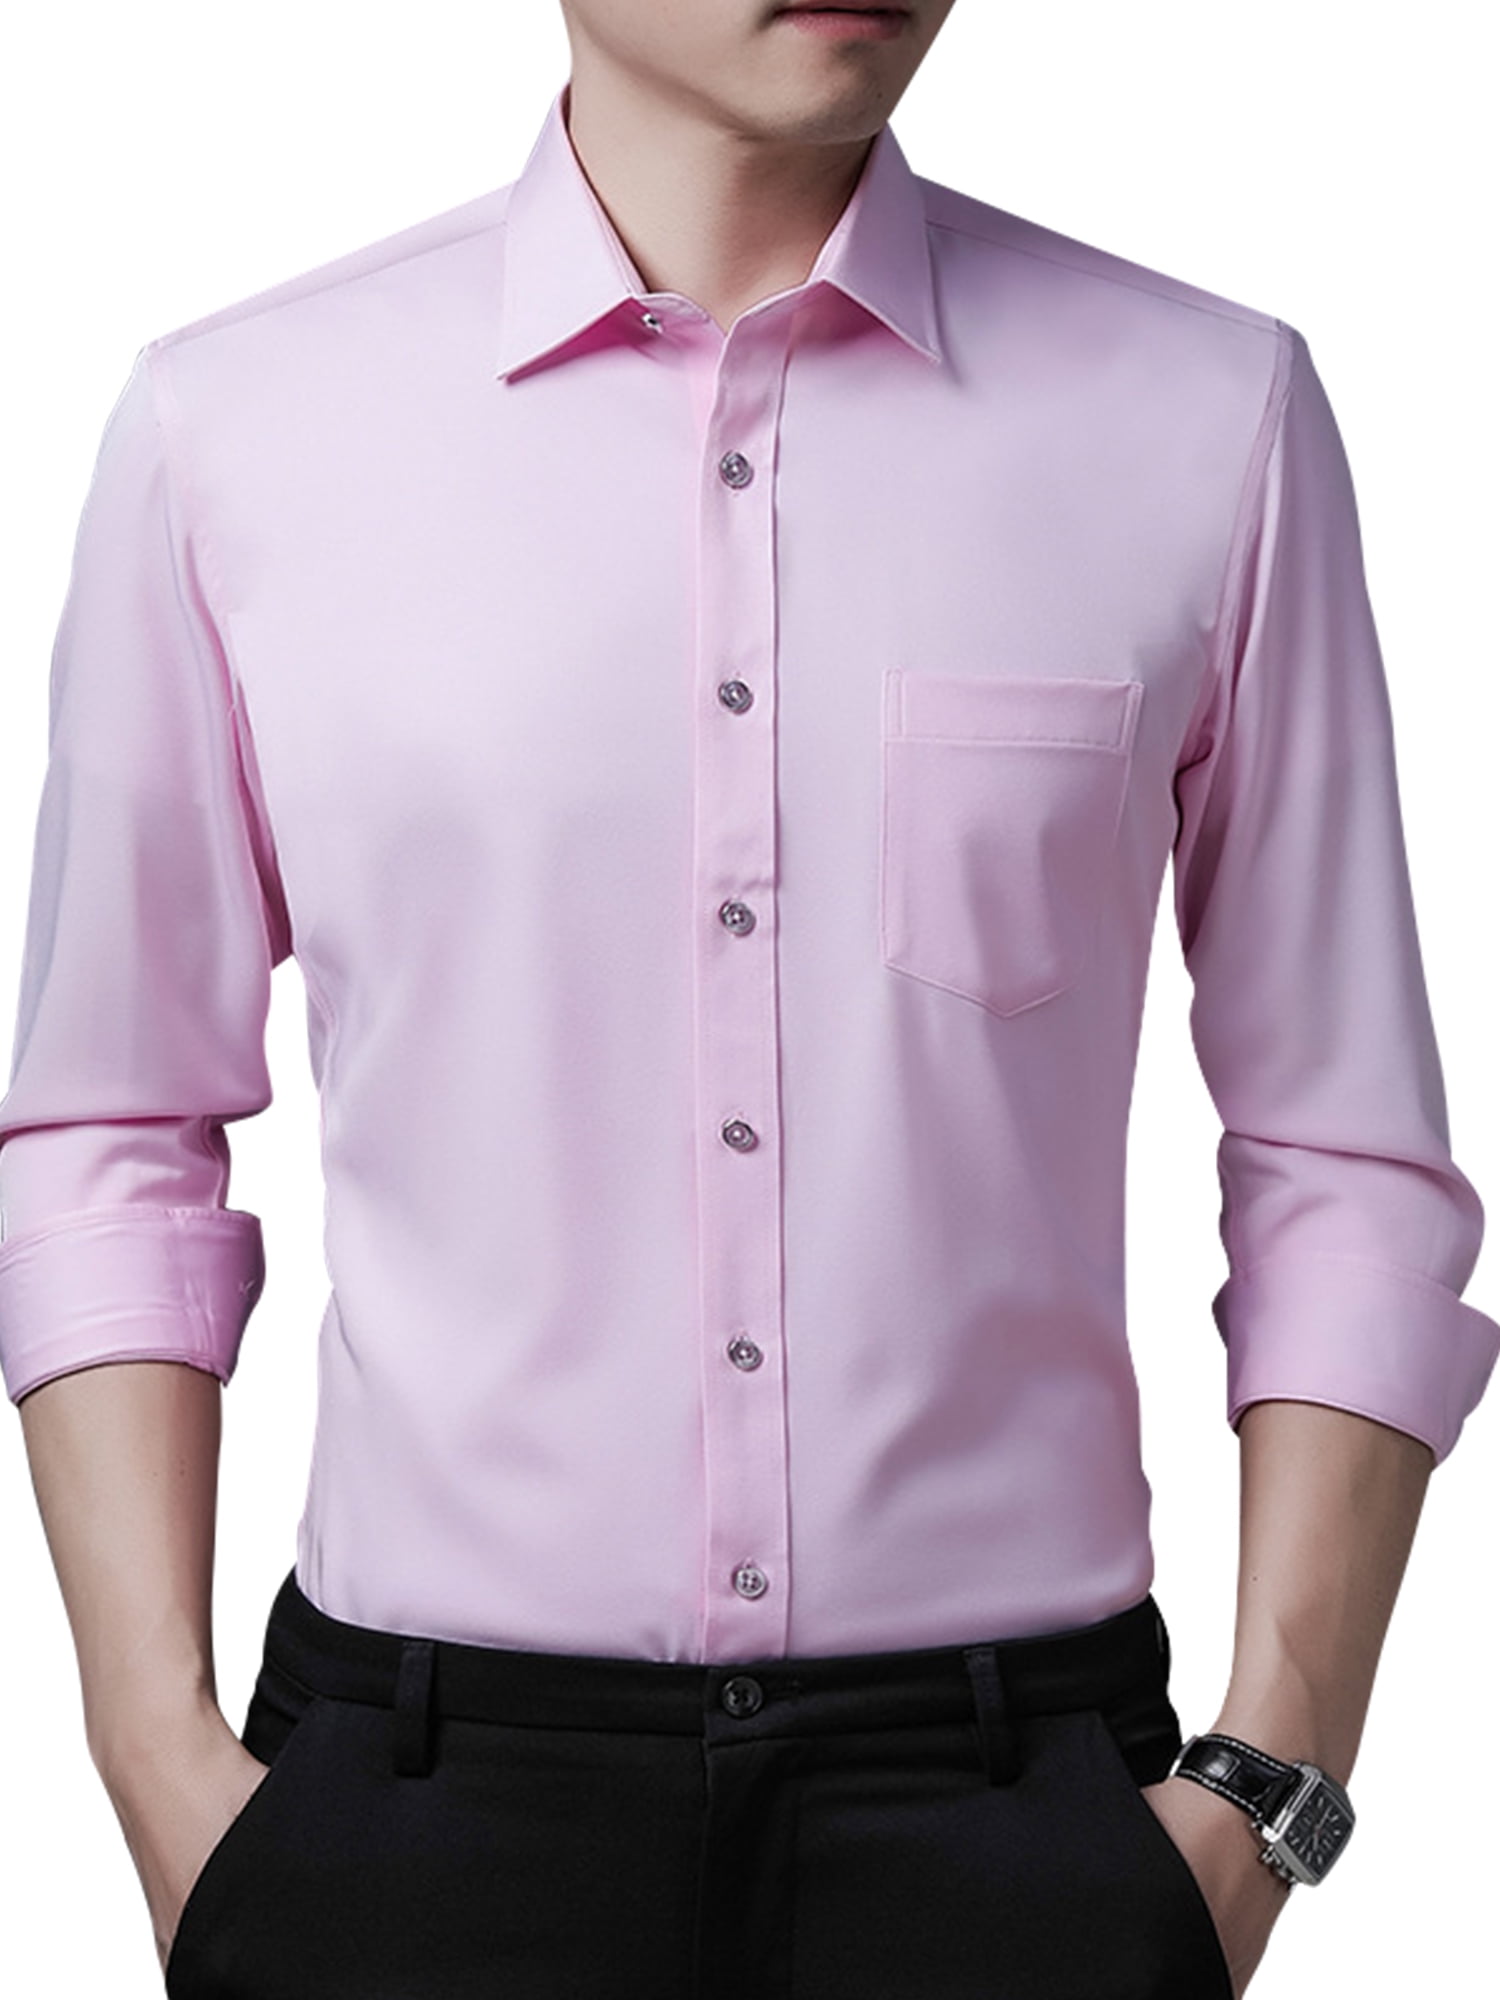 H&M Long Sleeve Shirt pink business style Fashion Formal Shirts Long Sleeve Shirts 